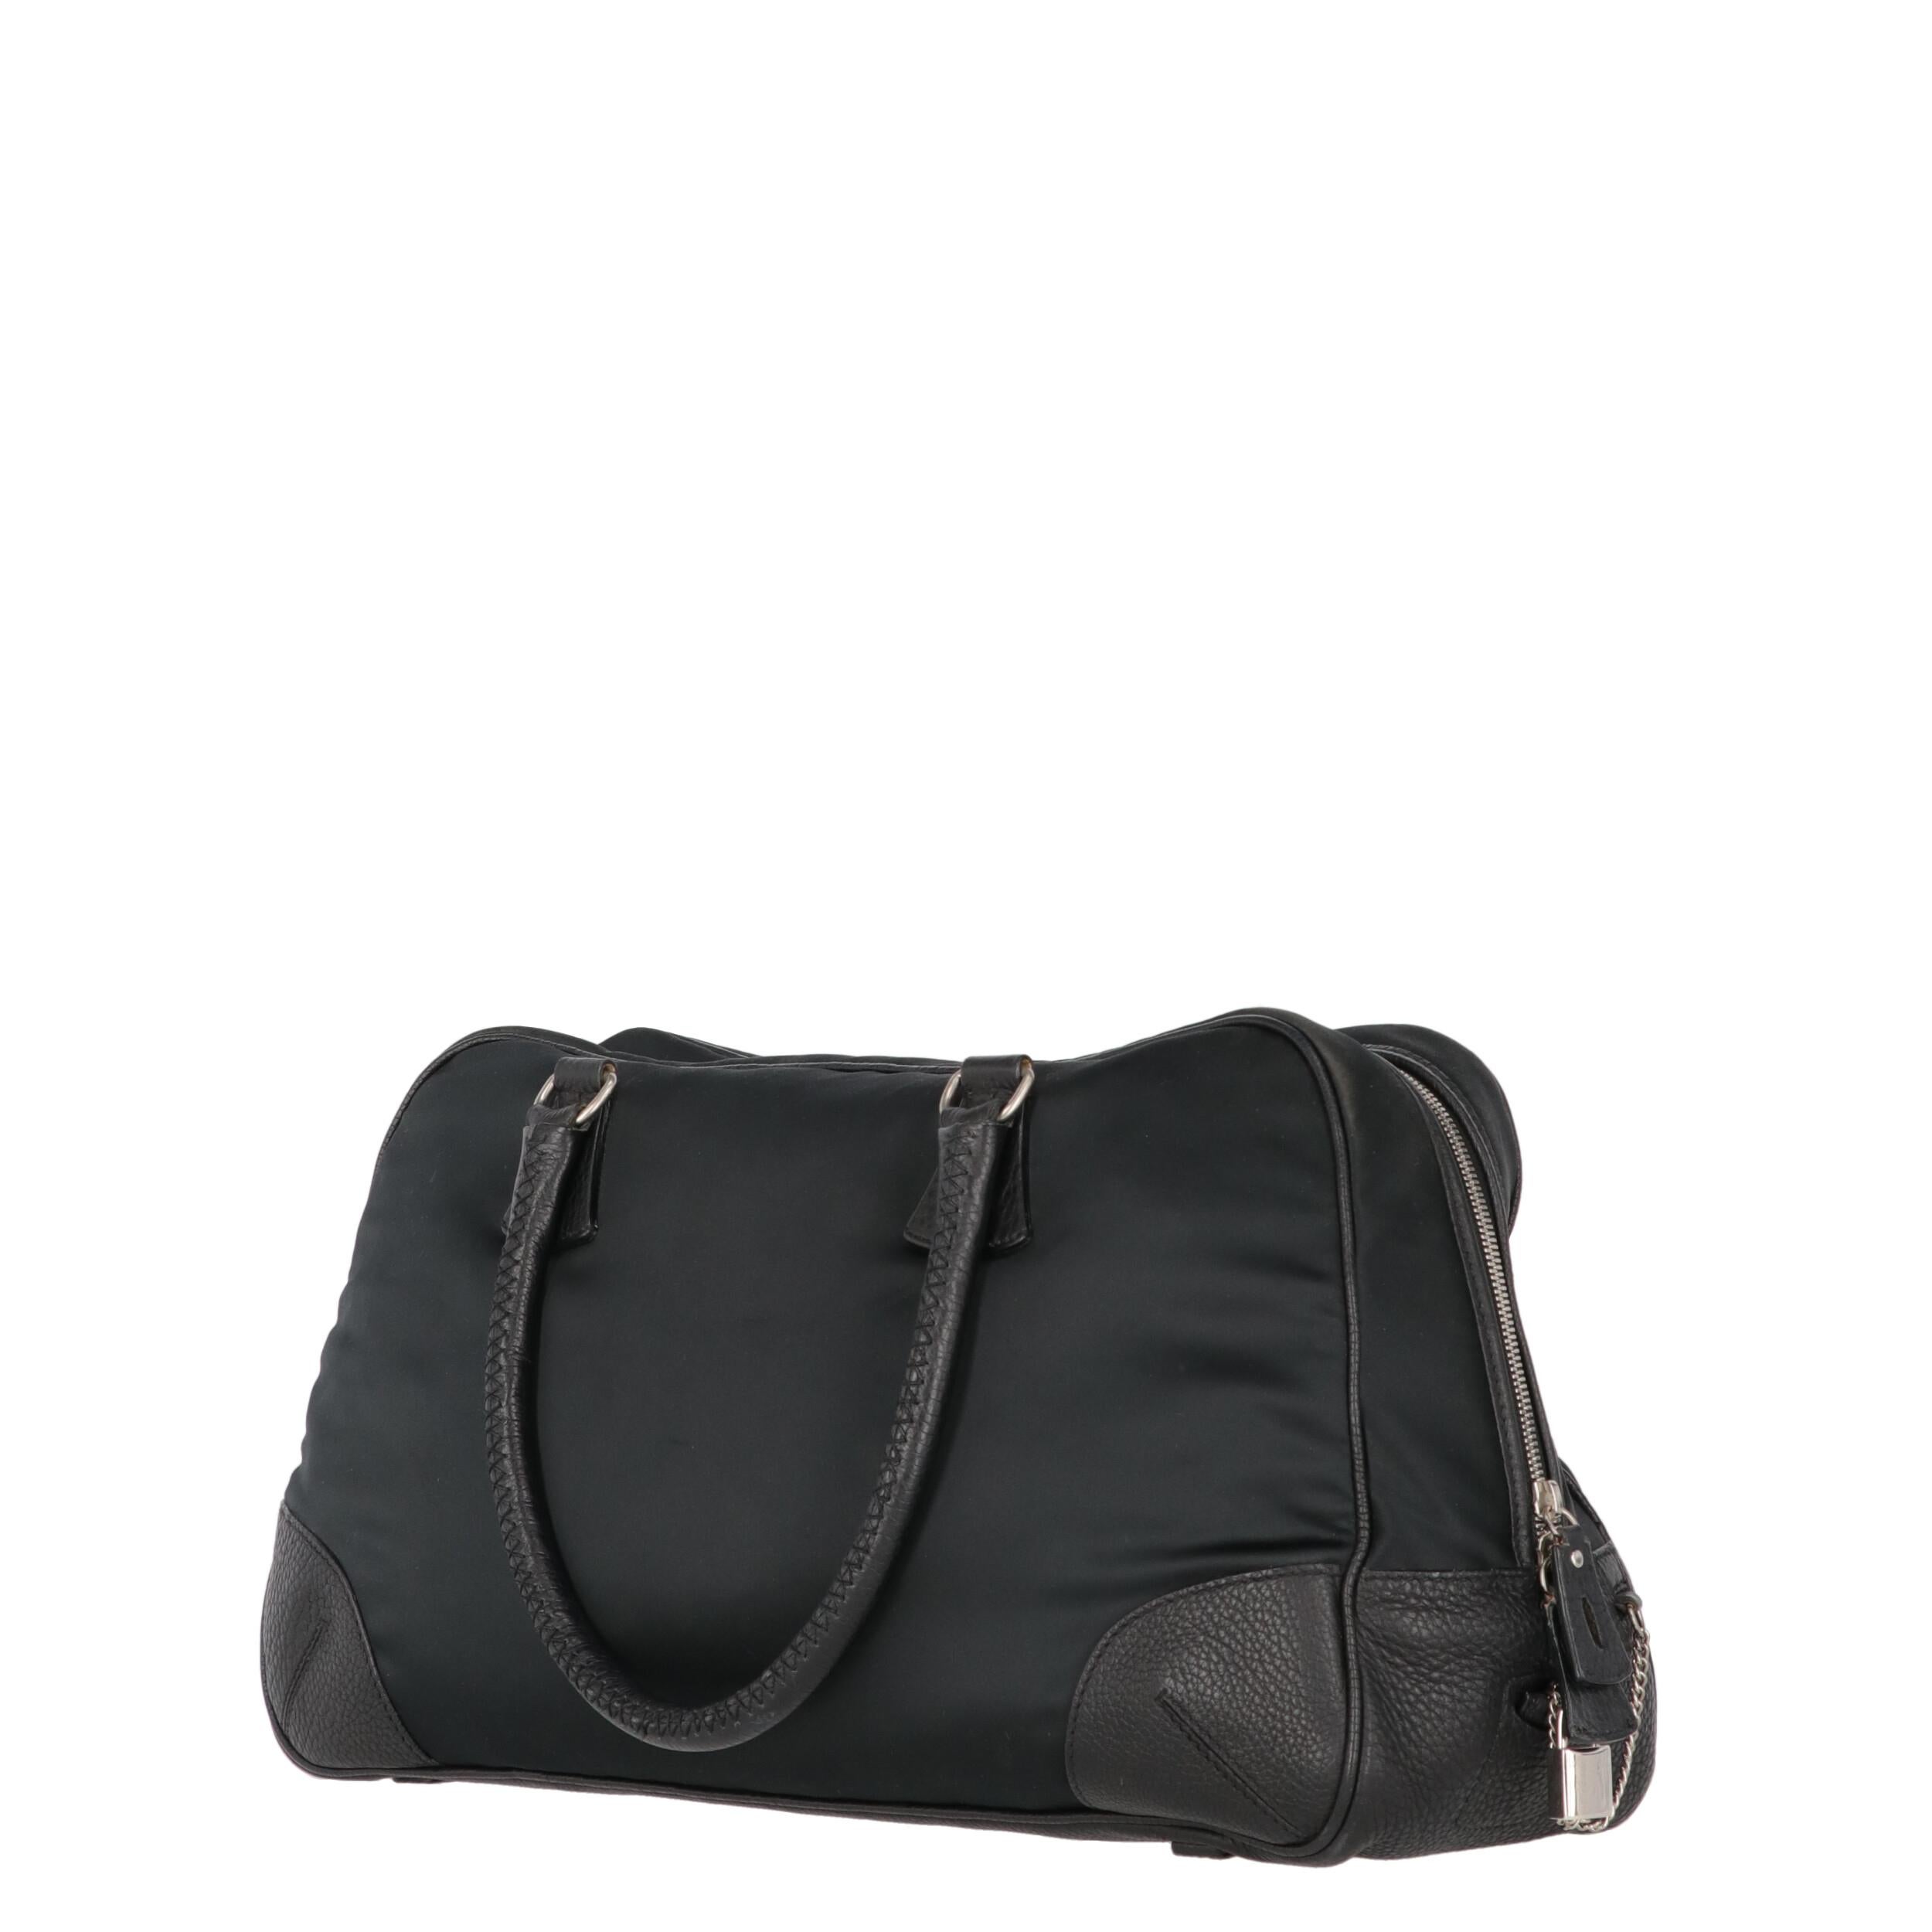 Giorgio Armani black nylon  travel bag with edges finished in leather. Two leather handles, two-way zip closure and lock with key.

The bag shows slight signs of wear on the corners and on the fabric, as shown in the pictures.
Years: 90s

Made in